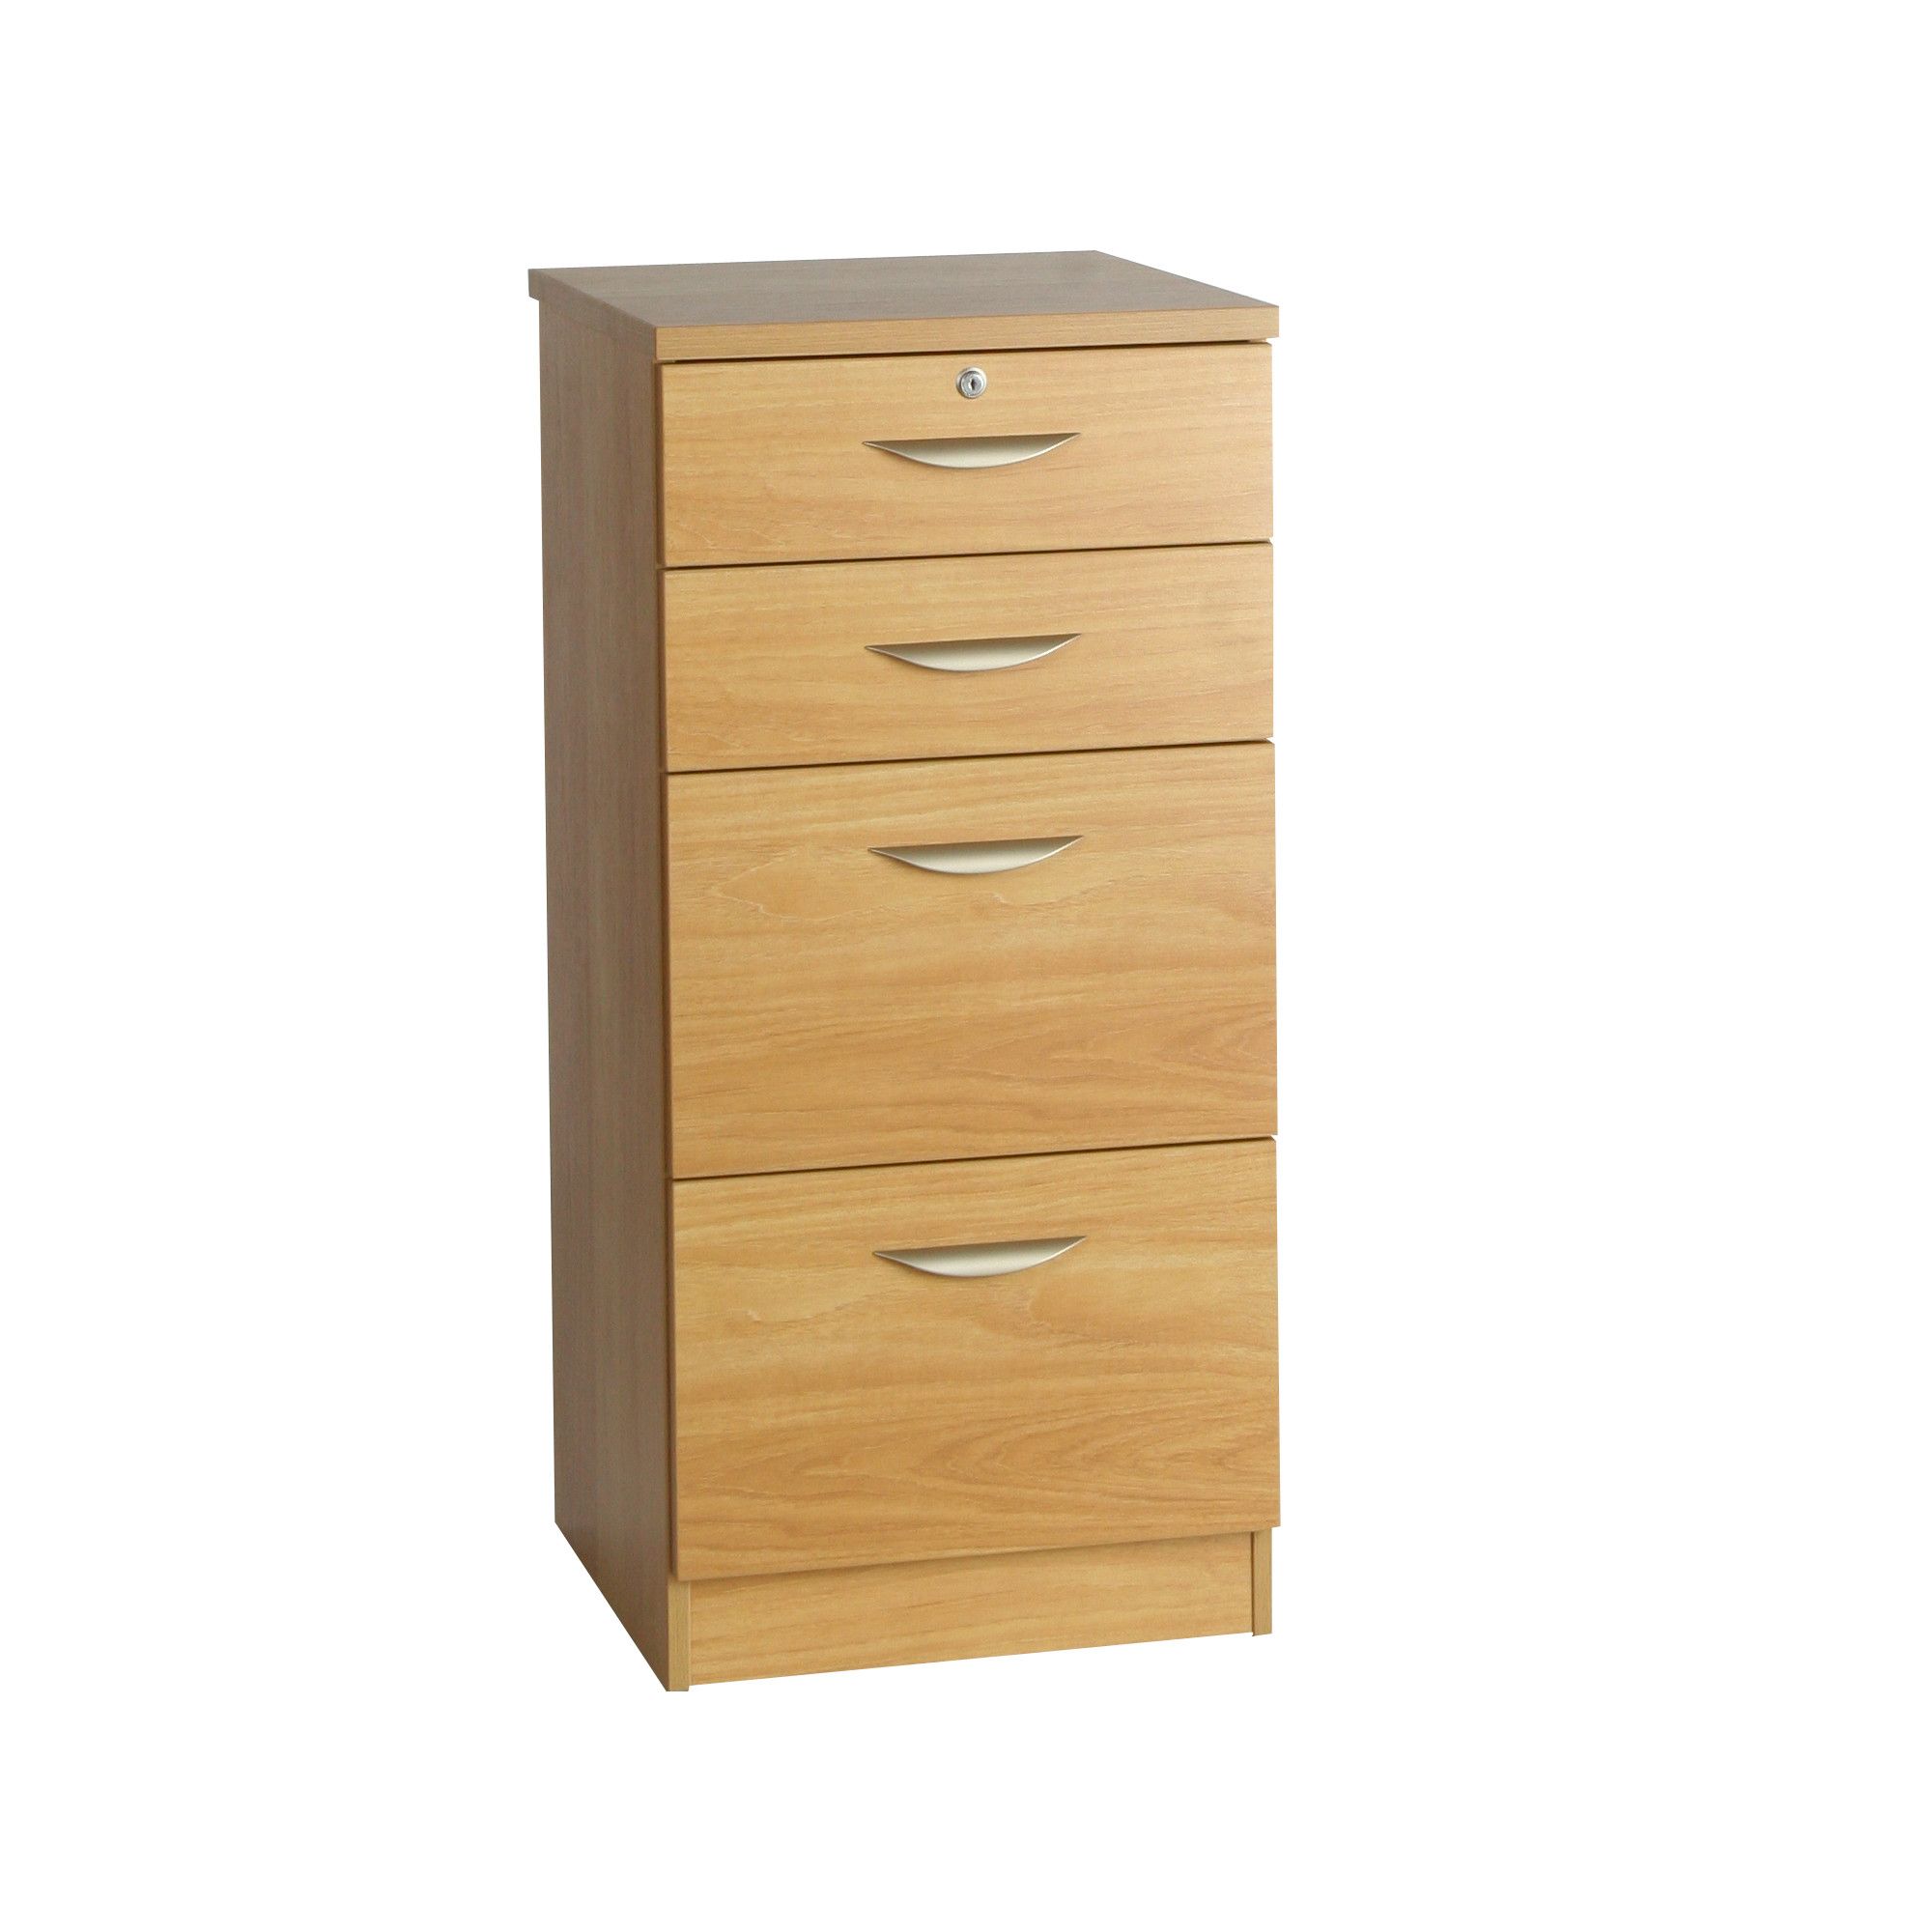 Enduro Four Drawer Tall Wooden Filing Cabinet - Warm Oak at Tescos Direct